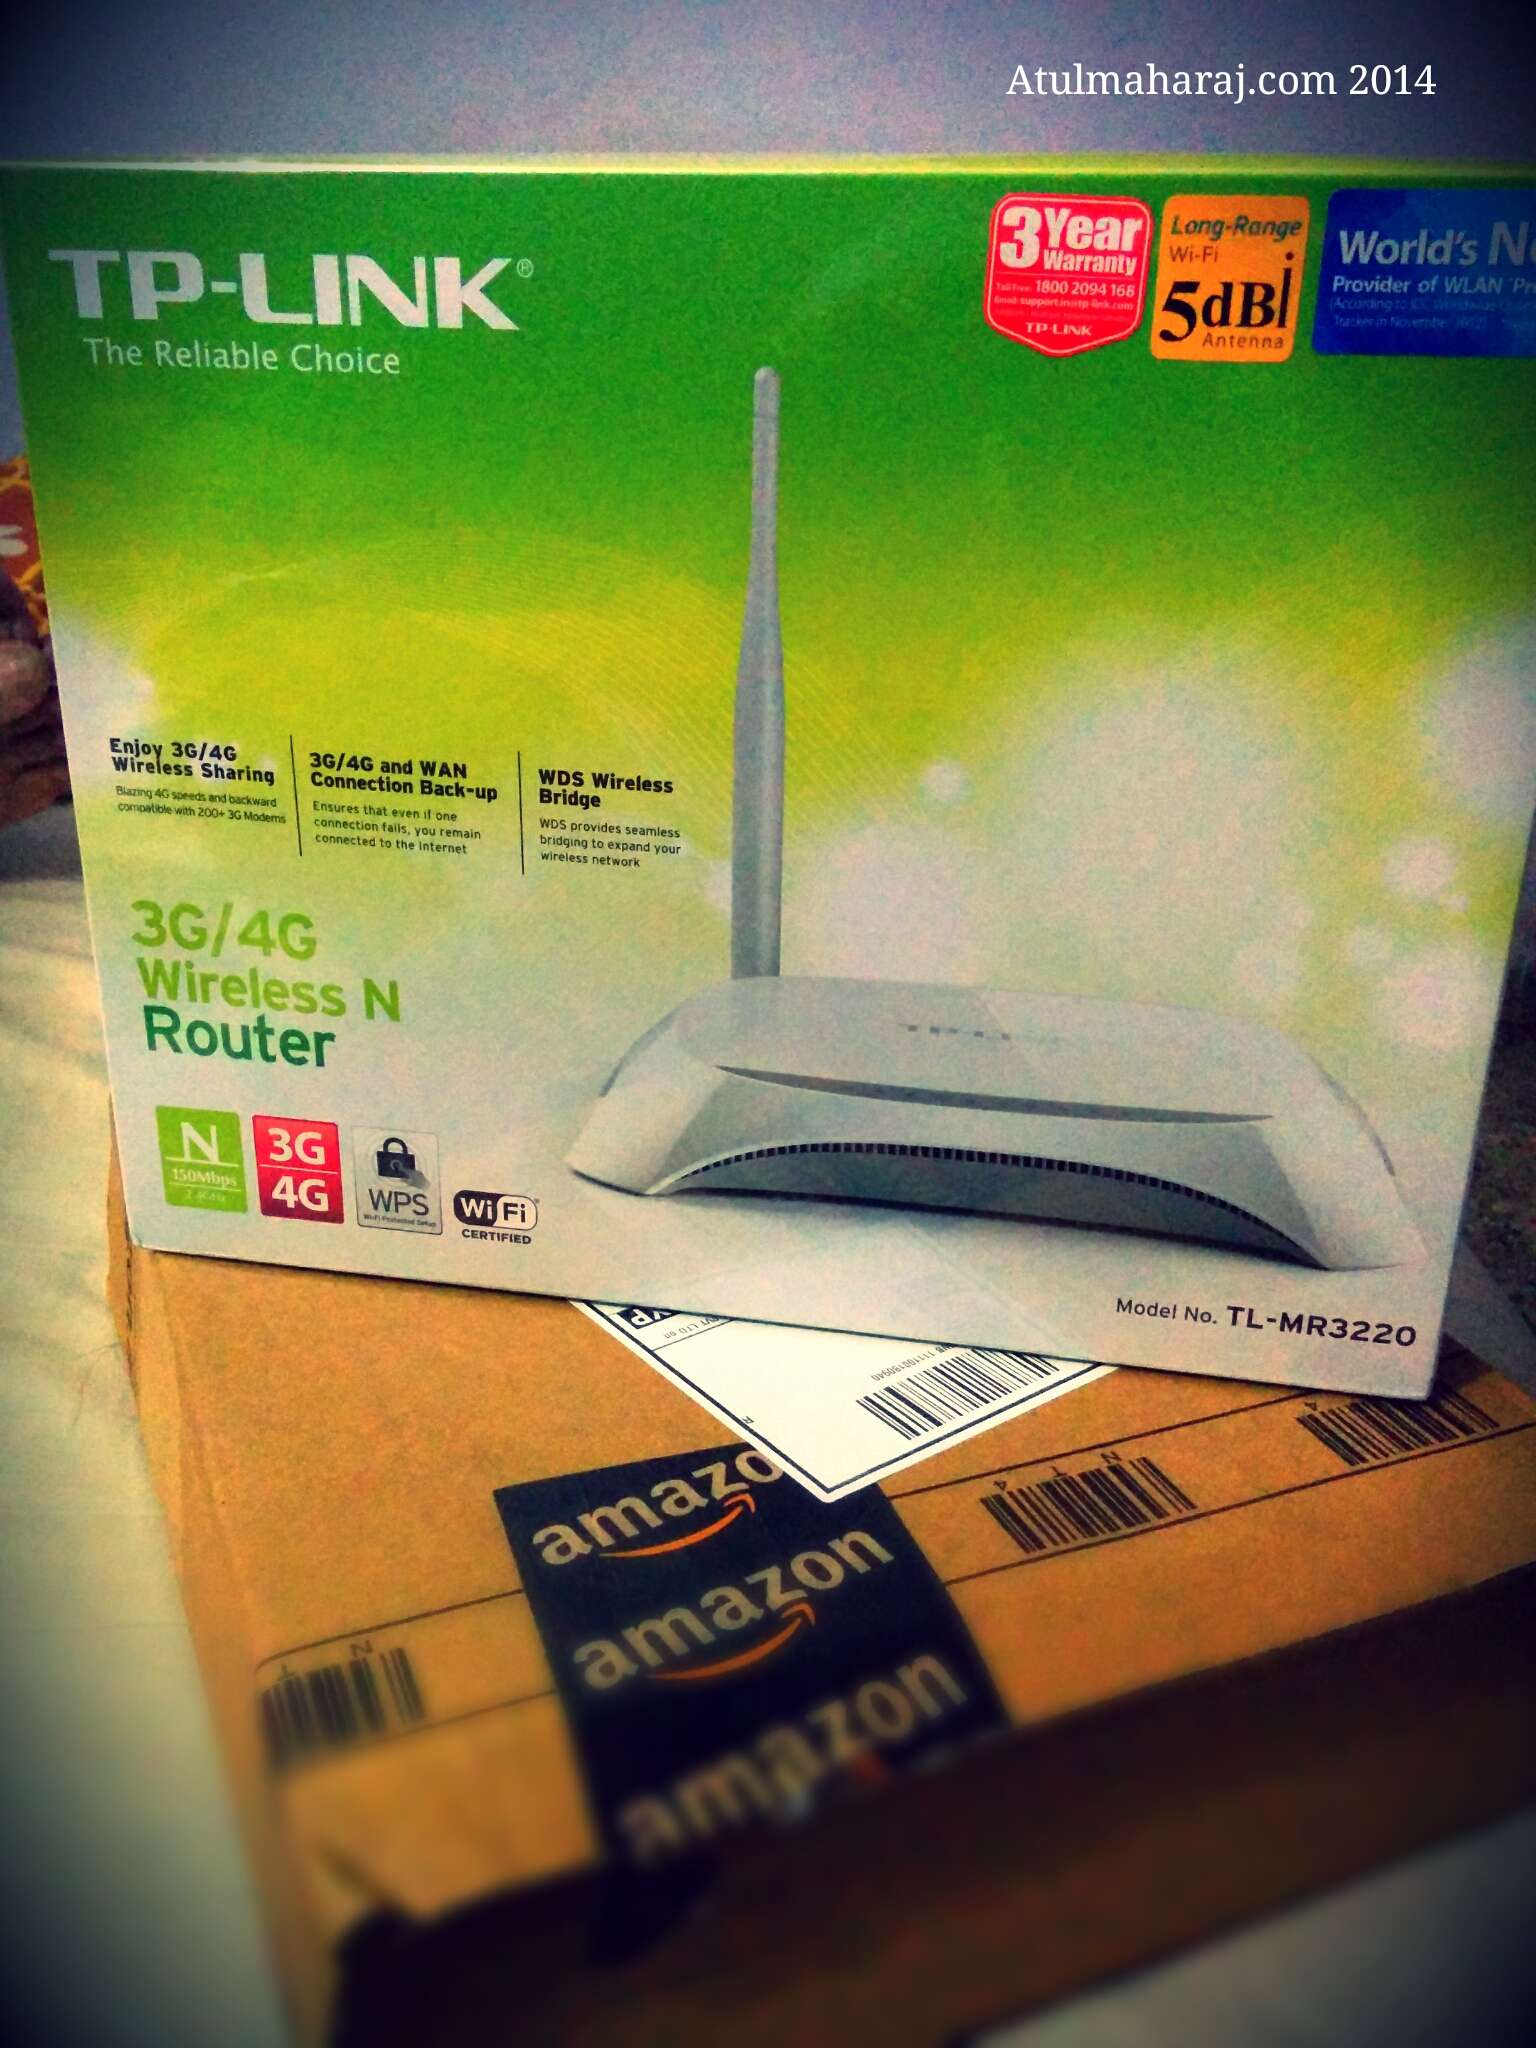 TP-Link MR3220 3G WiFi Router shipped by Amazon.in ;)